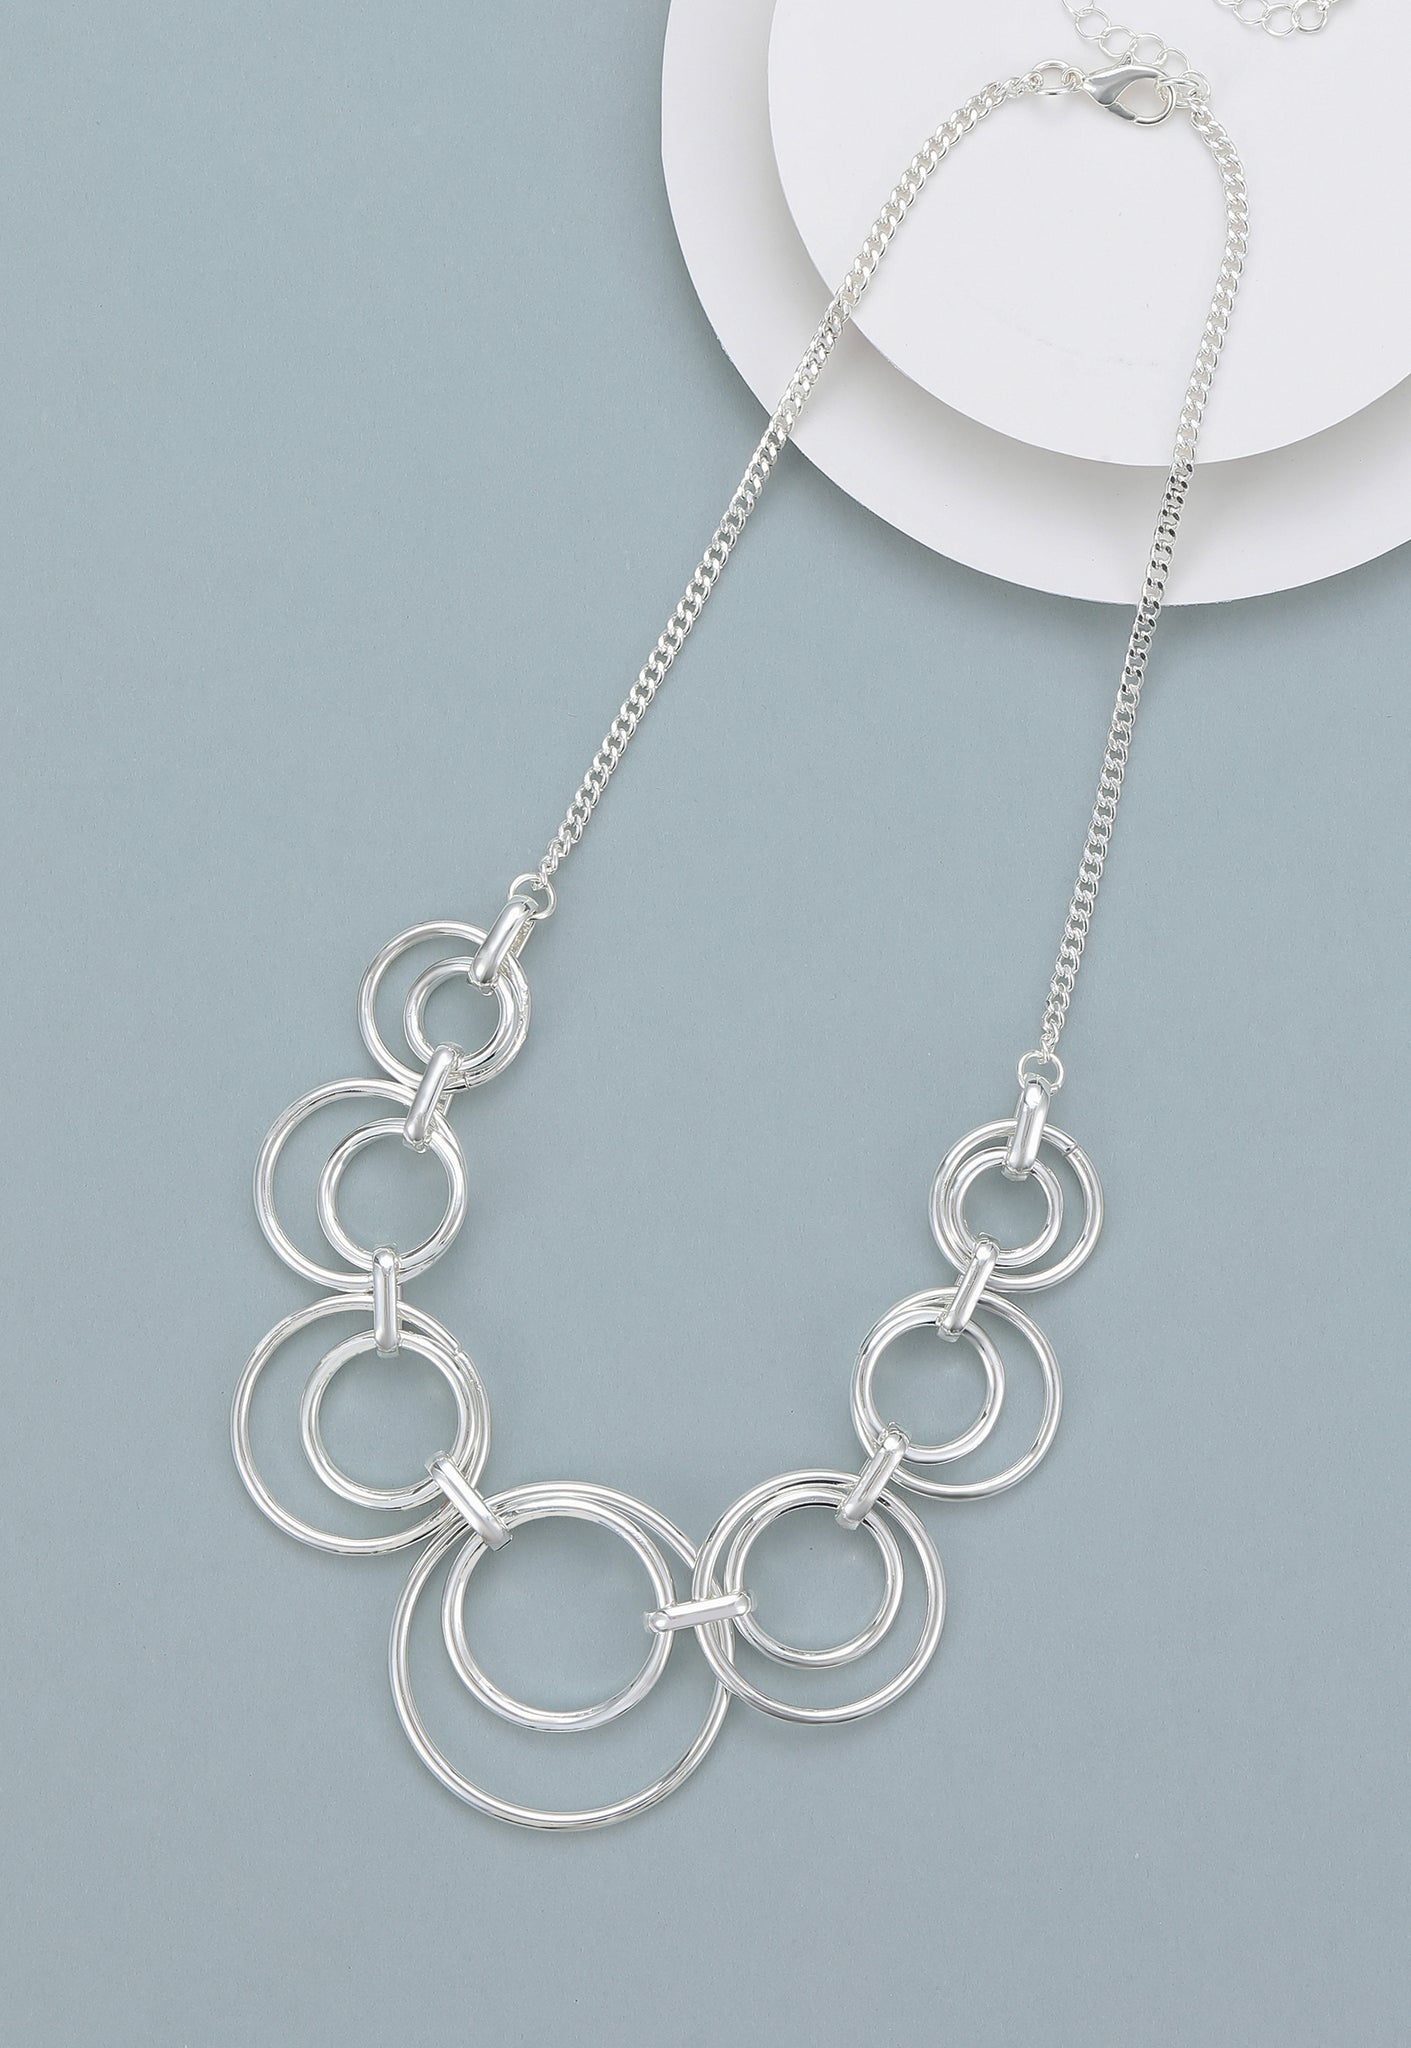 Silver Double Rings Necklace